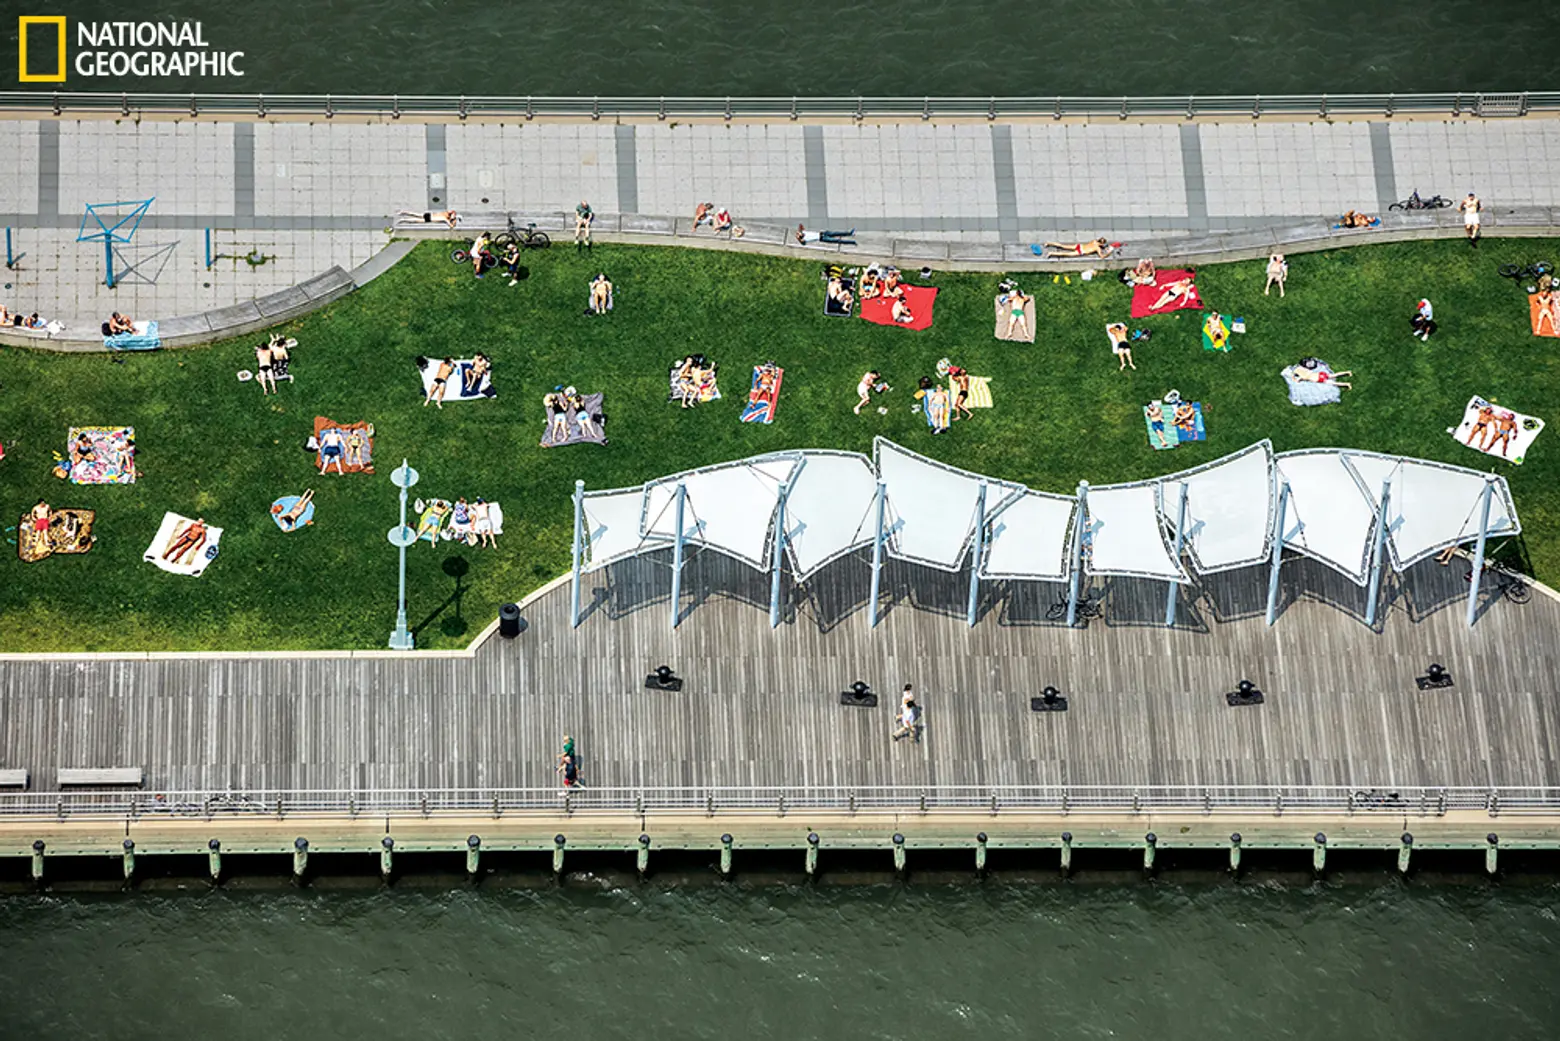 George Steinmetz, New York Air: The View From Above, National Geographic, NYC aerial photography, 